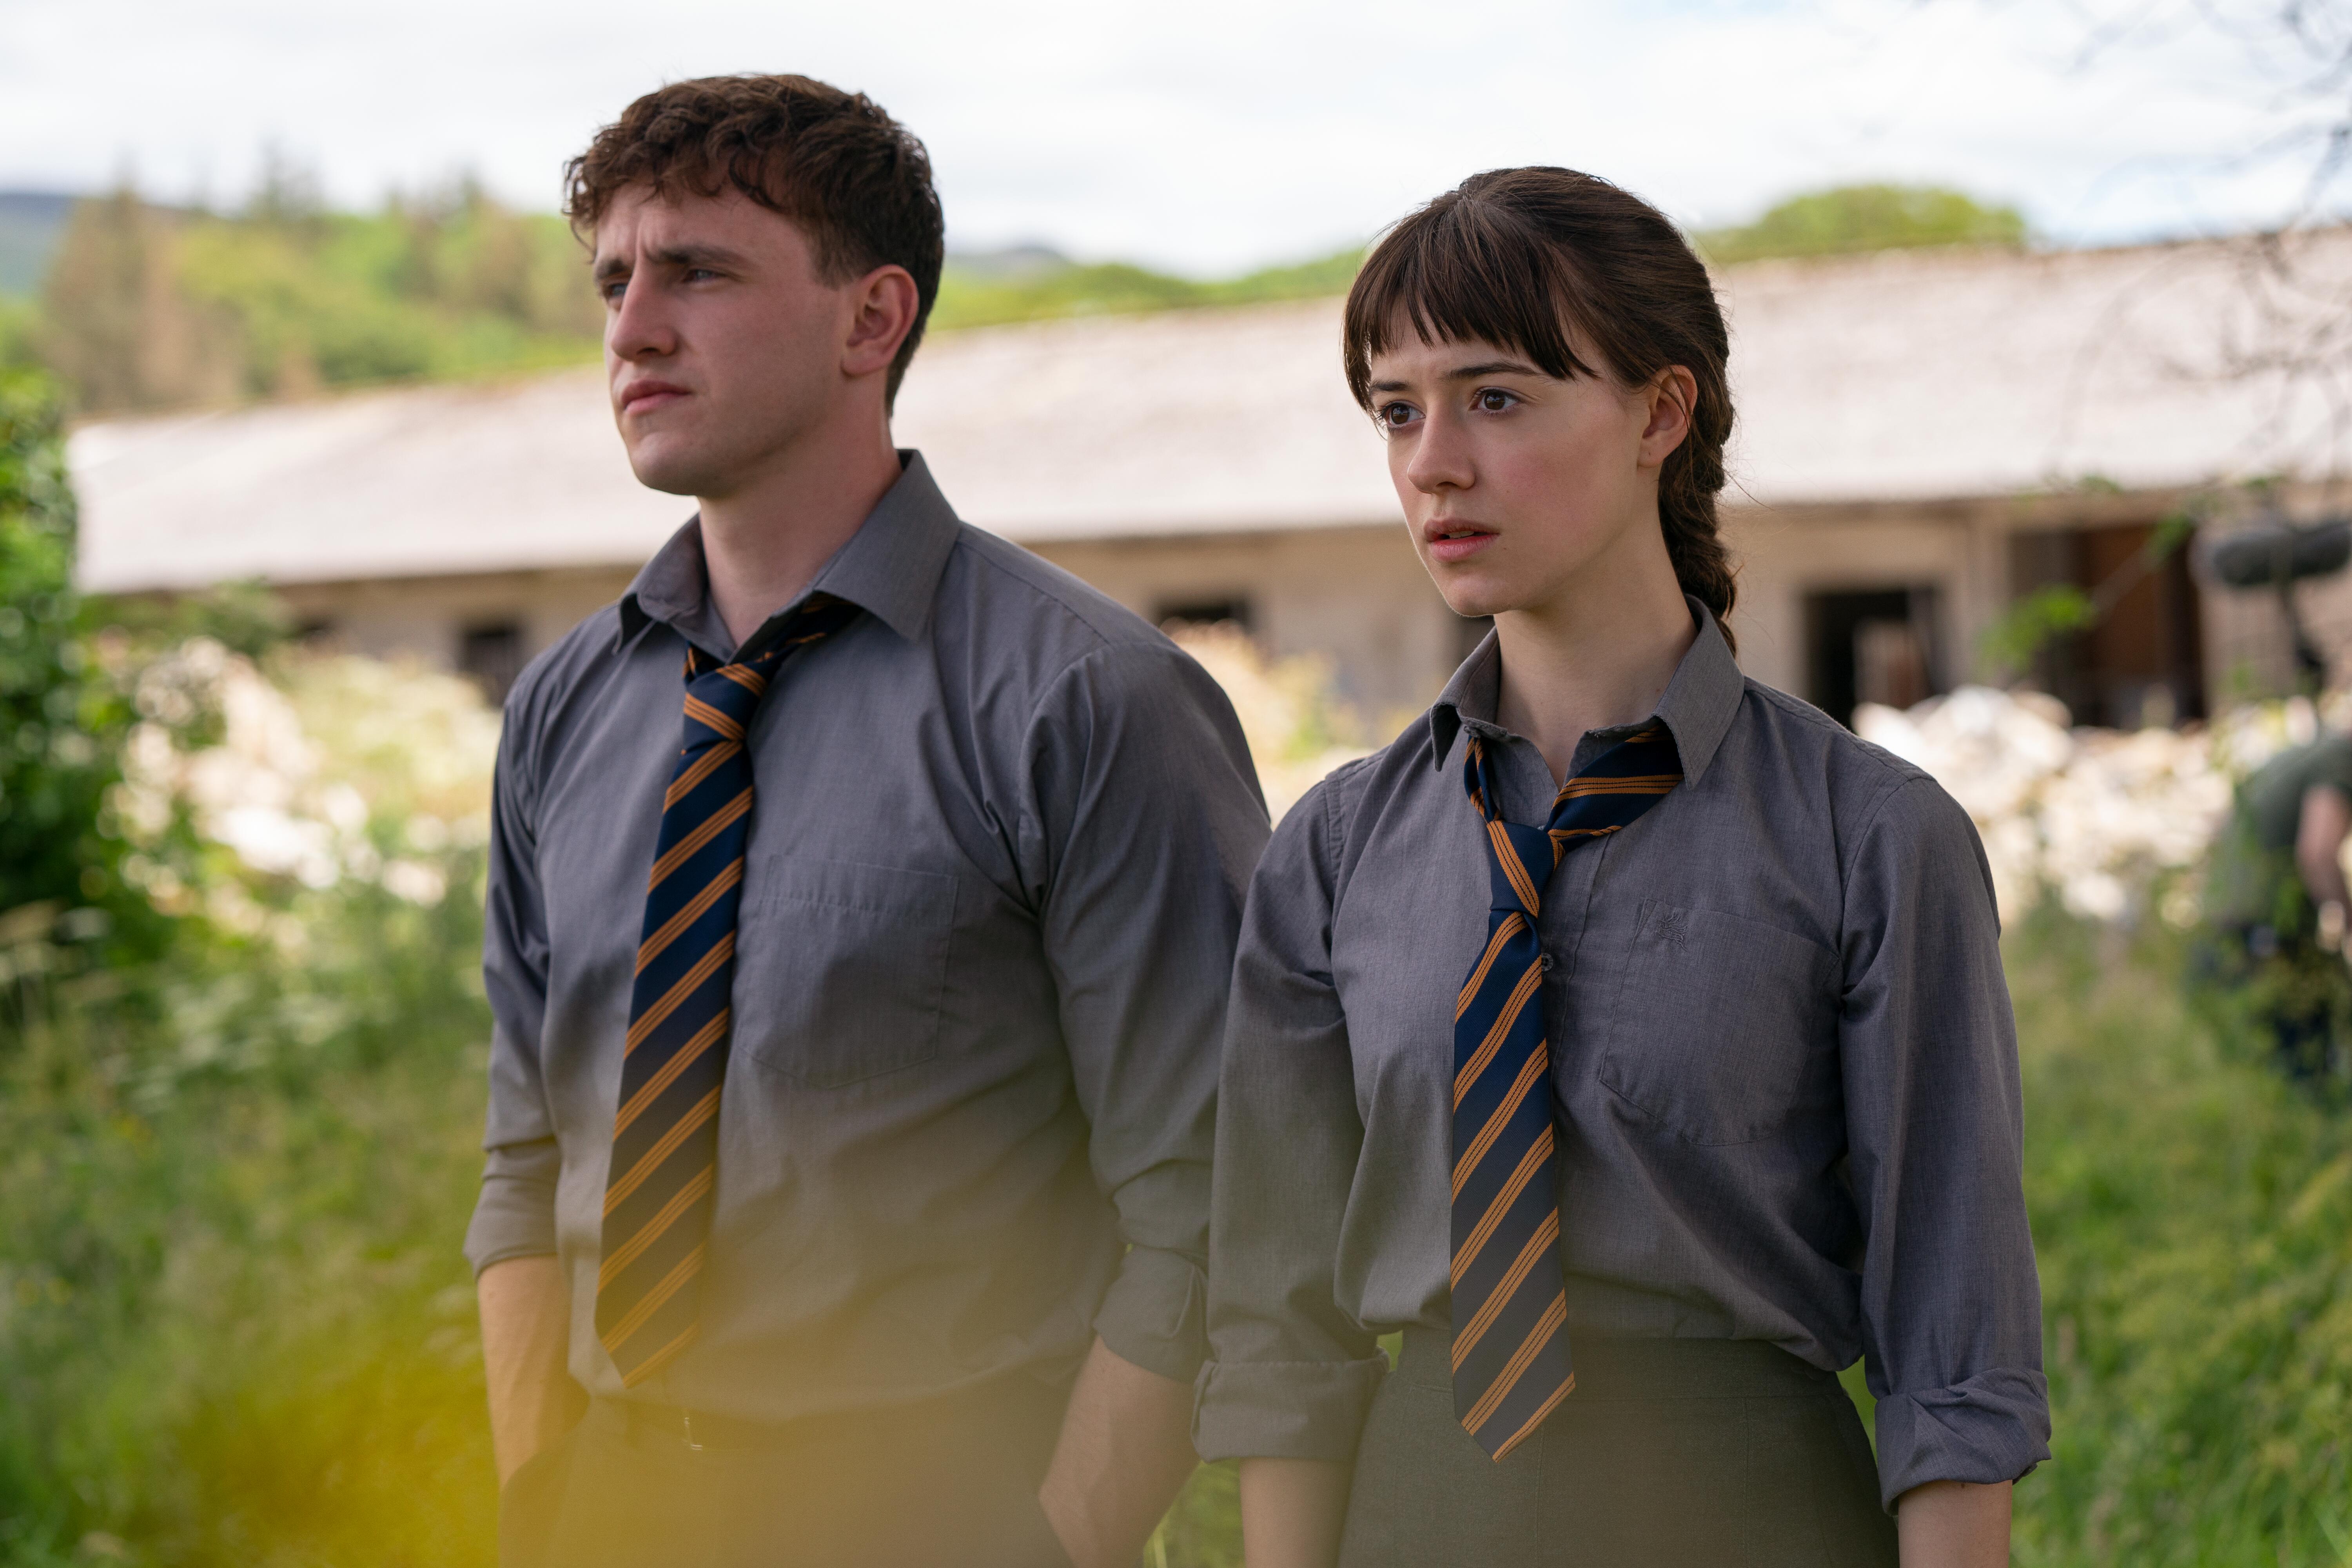 Connell and Marianne wearing school uniforms